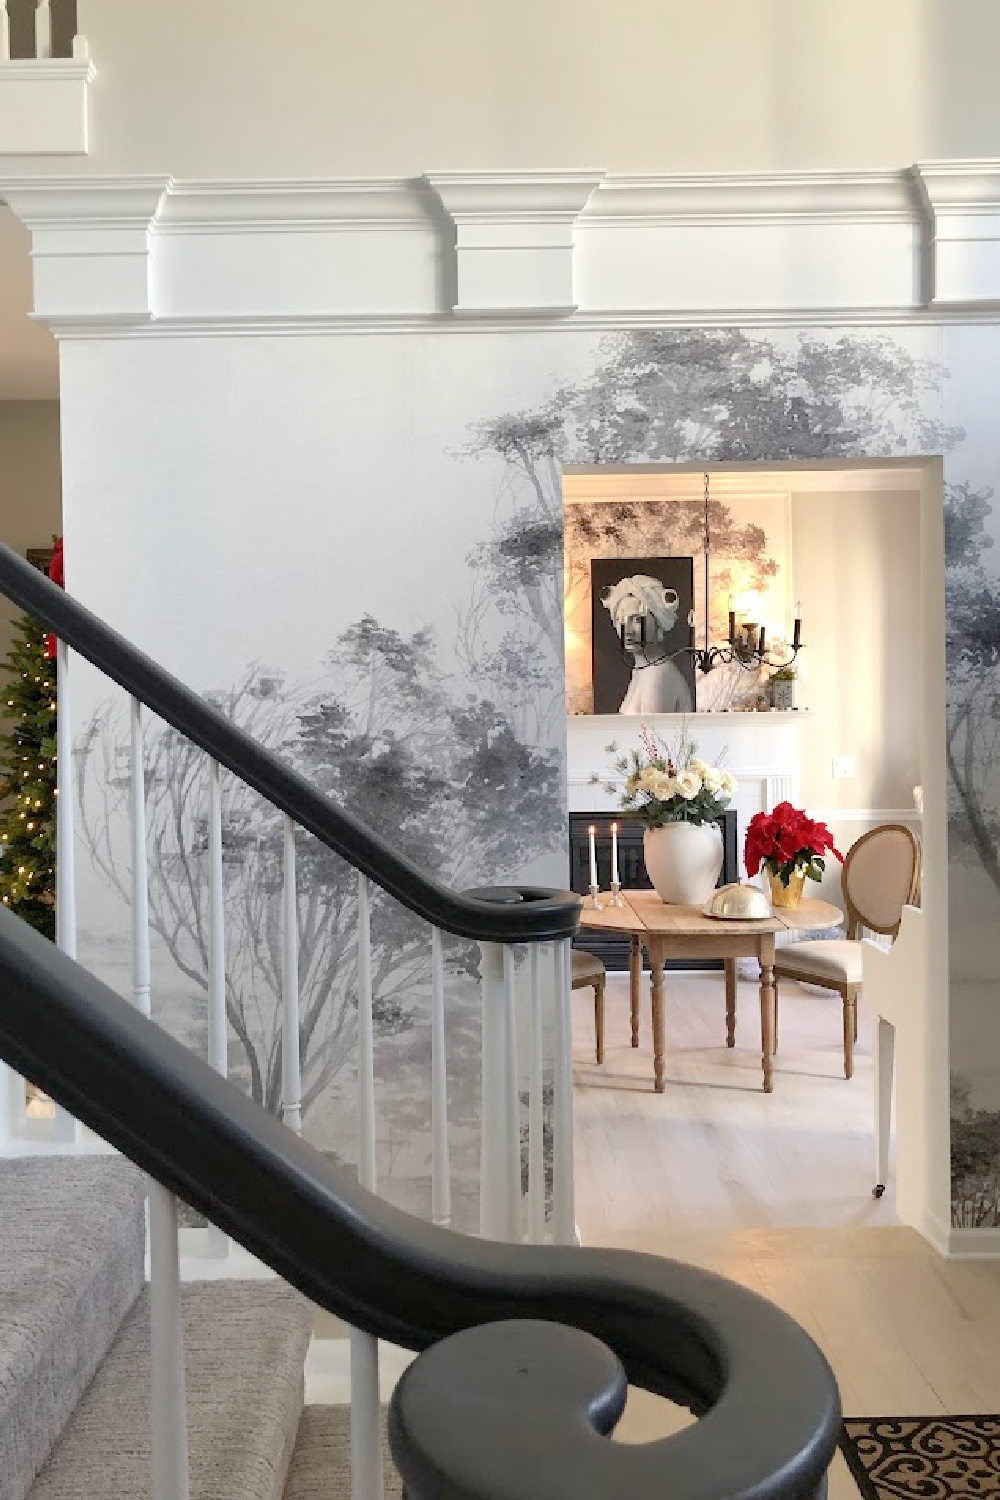 Entry, staircase and dining room in our Georgian. The wallpaper mural is by Photowall.